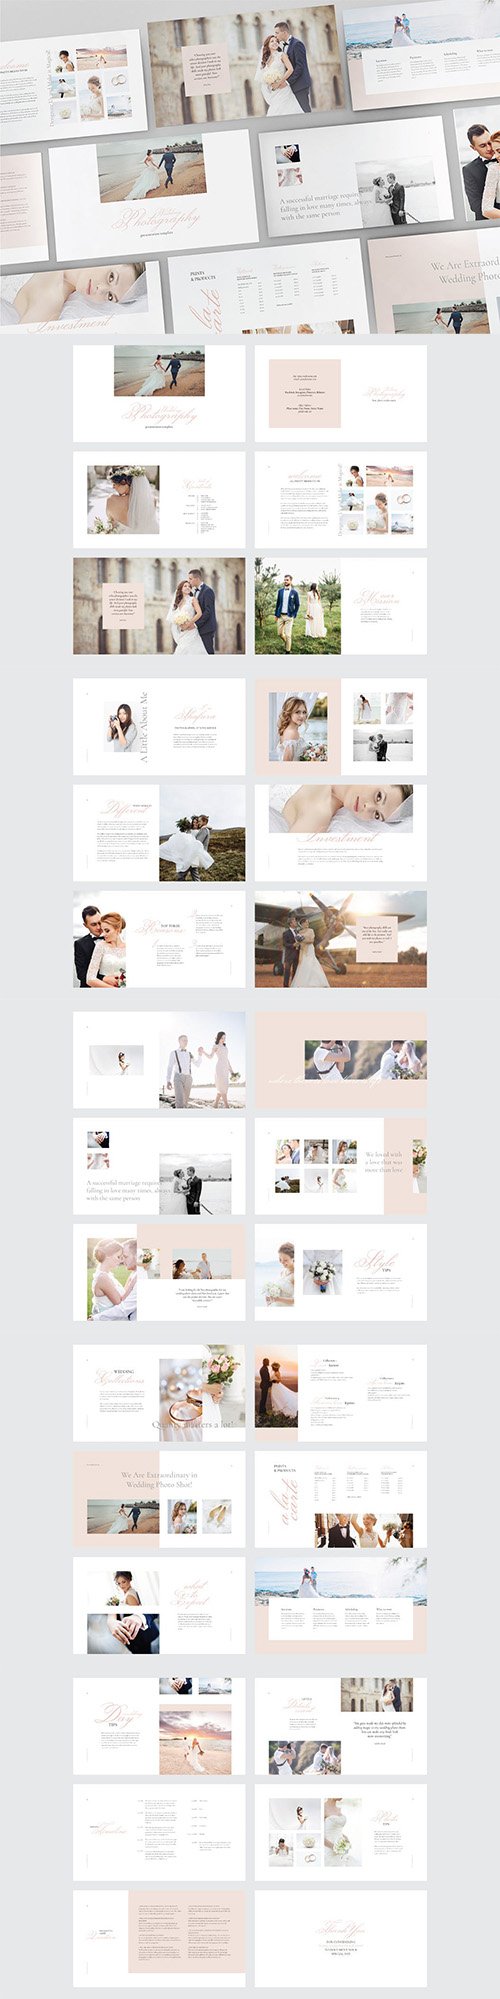 WEDDING PHOTOGRAPHY - Powerpoint Template V99